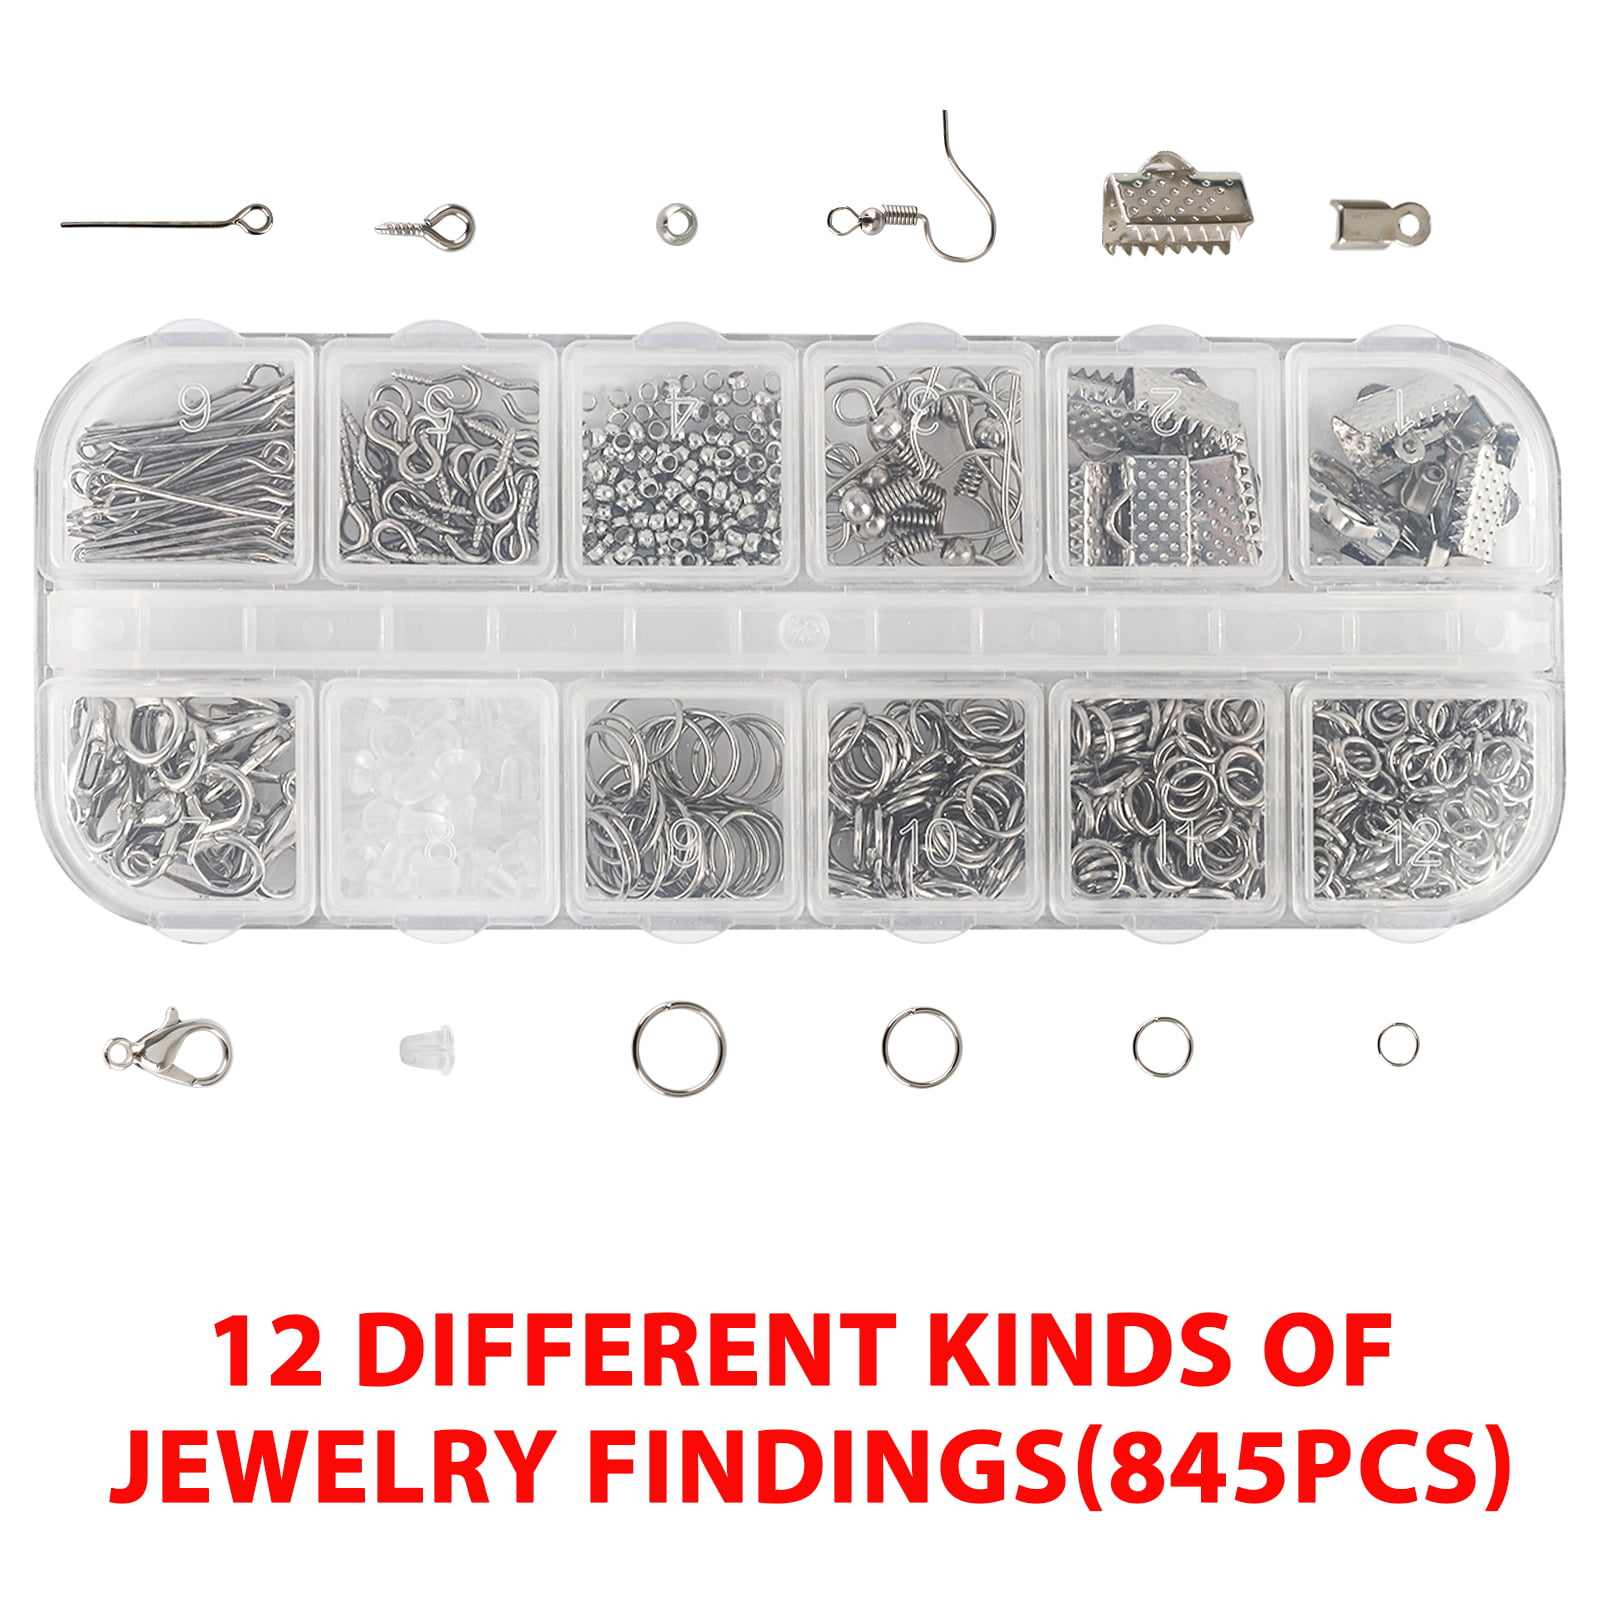  LZKW Jewelry Making Tool Kit, Earring DIY Kit Safe and